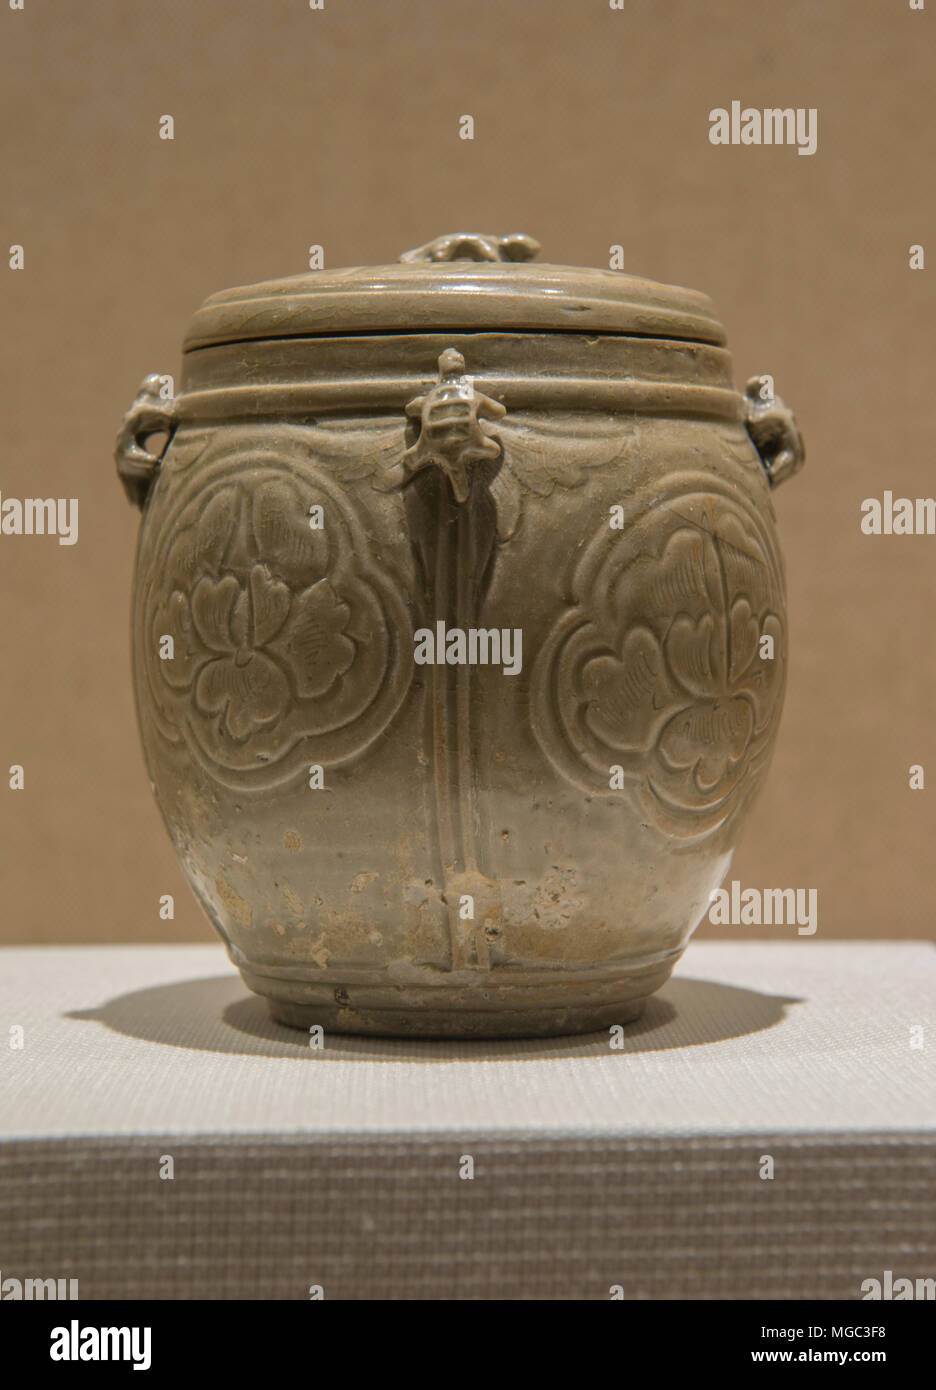 Yue ware peony pattern celadon glazing covered jar with turtle knobs in Zhejiang Museum in Hangzhou, China. Northern Song Dynasty (AD960-1127) Stock Photo